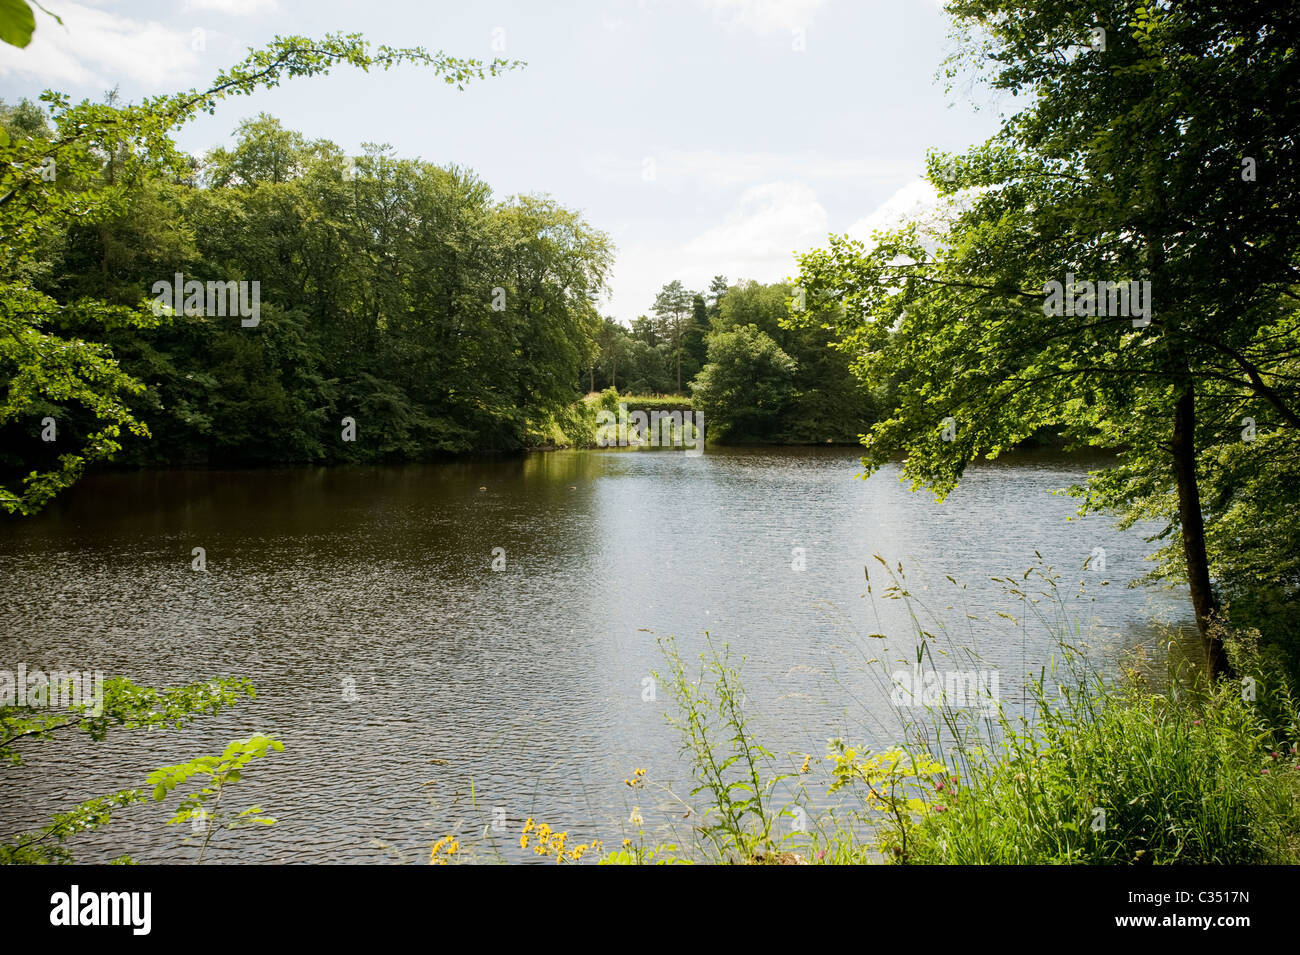 The man-made lake on Ingleborough estate nature trail in the village of Clapham, North Yorkshire. Stock Photo